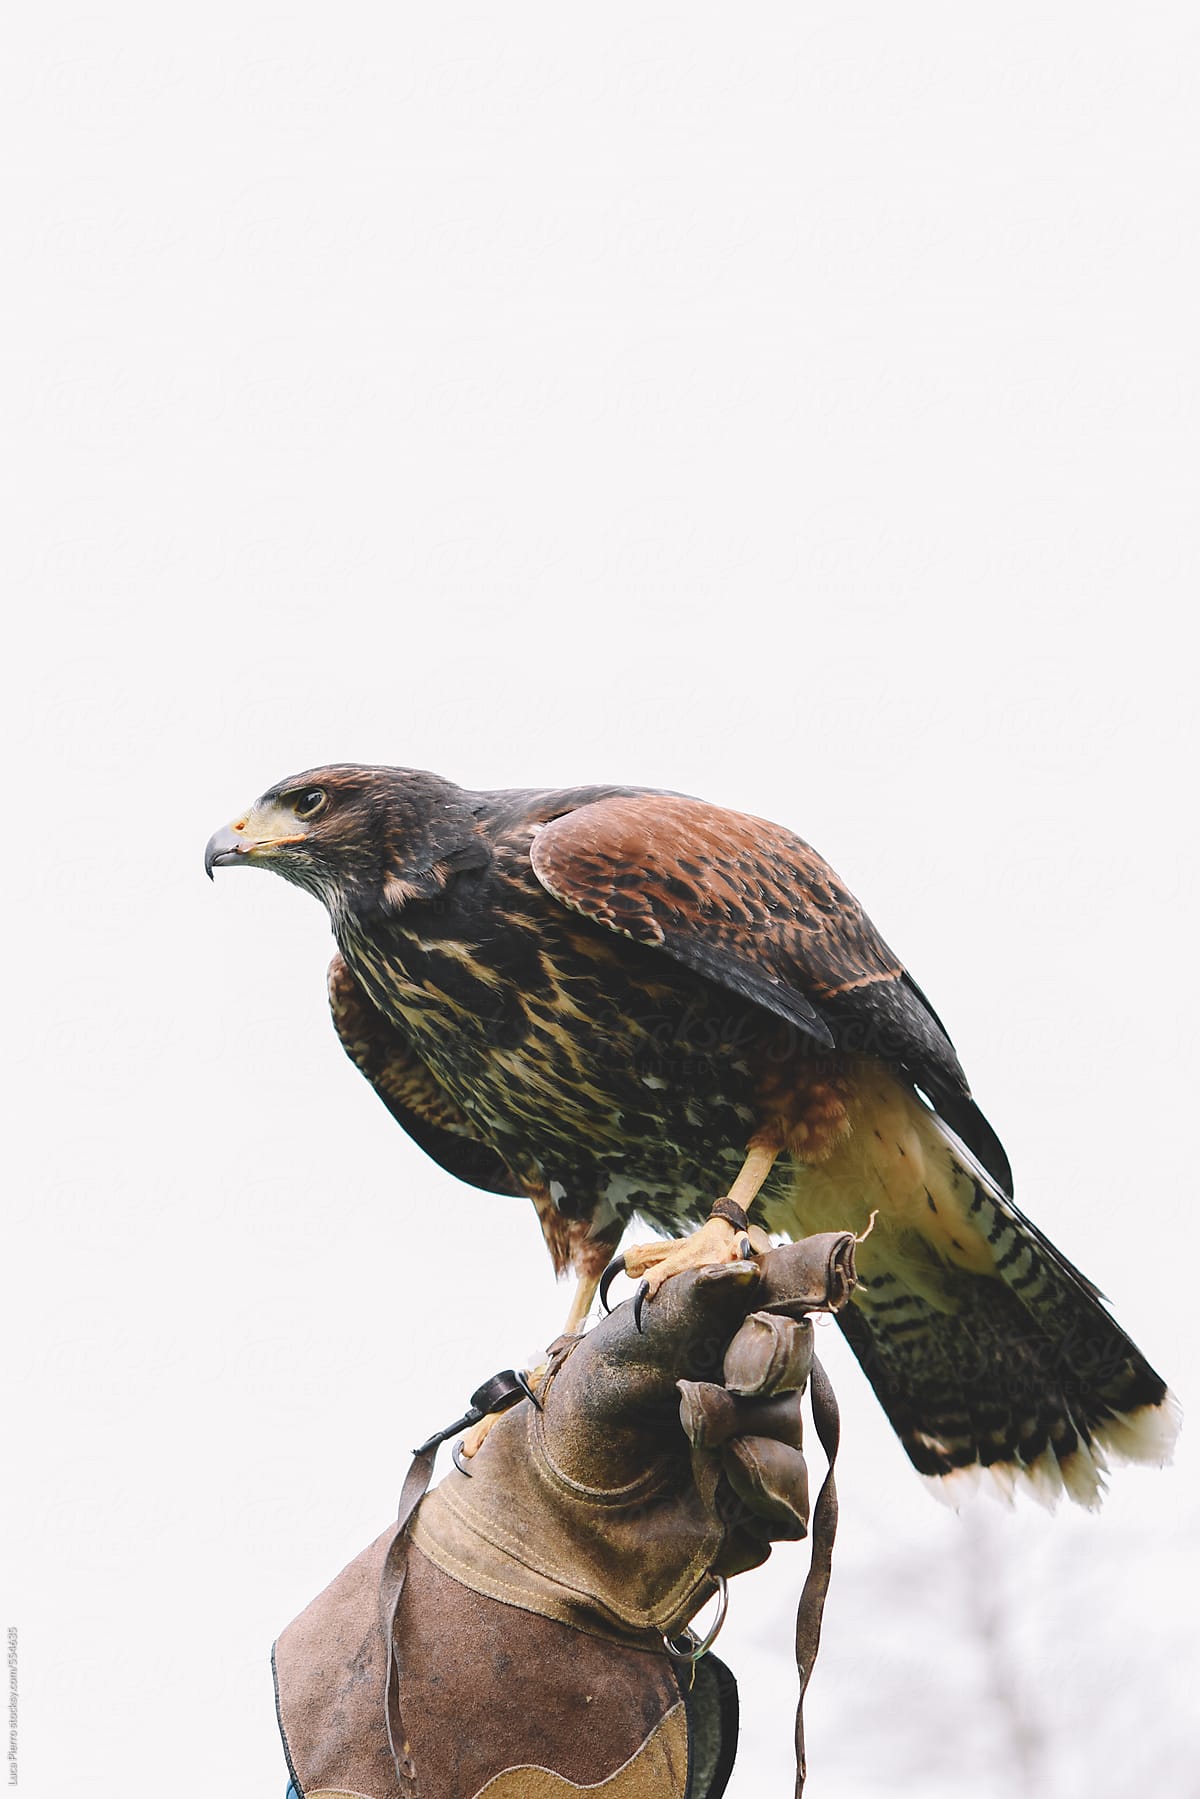 A brown falcon used for falconry